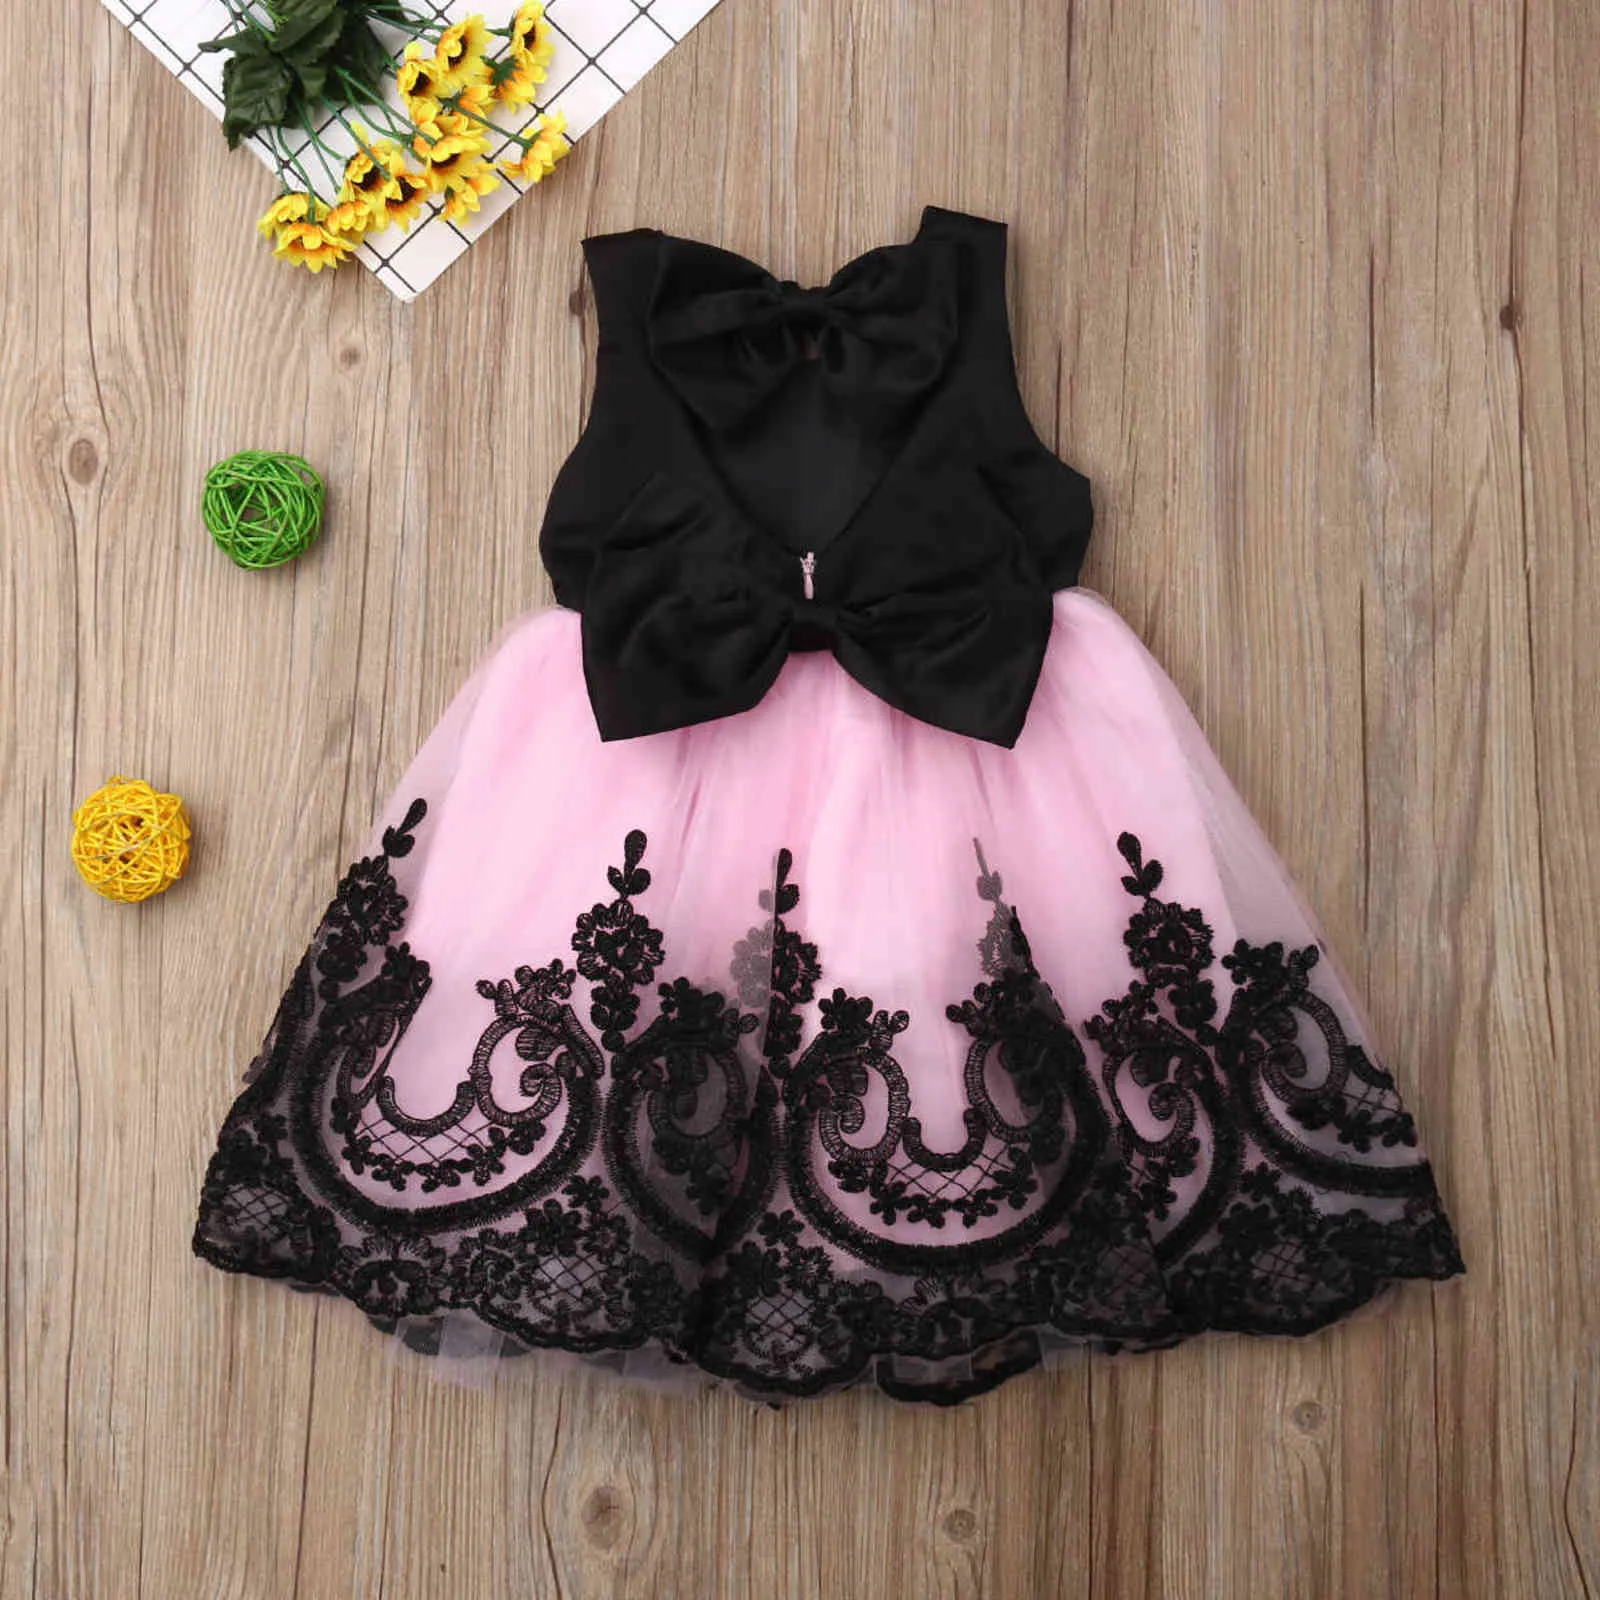 1-6Years Toddler Baby Kid Girls Princess Dress Black Bow Lace Tulle Tutu Party Wedding Birthday Dresses For Girls Costumes G1129